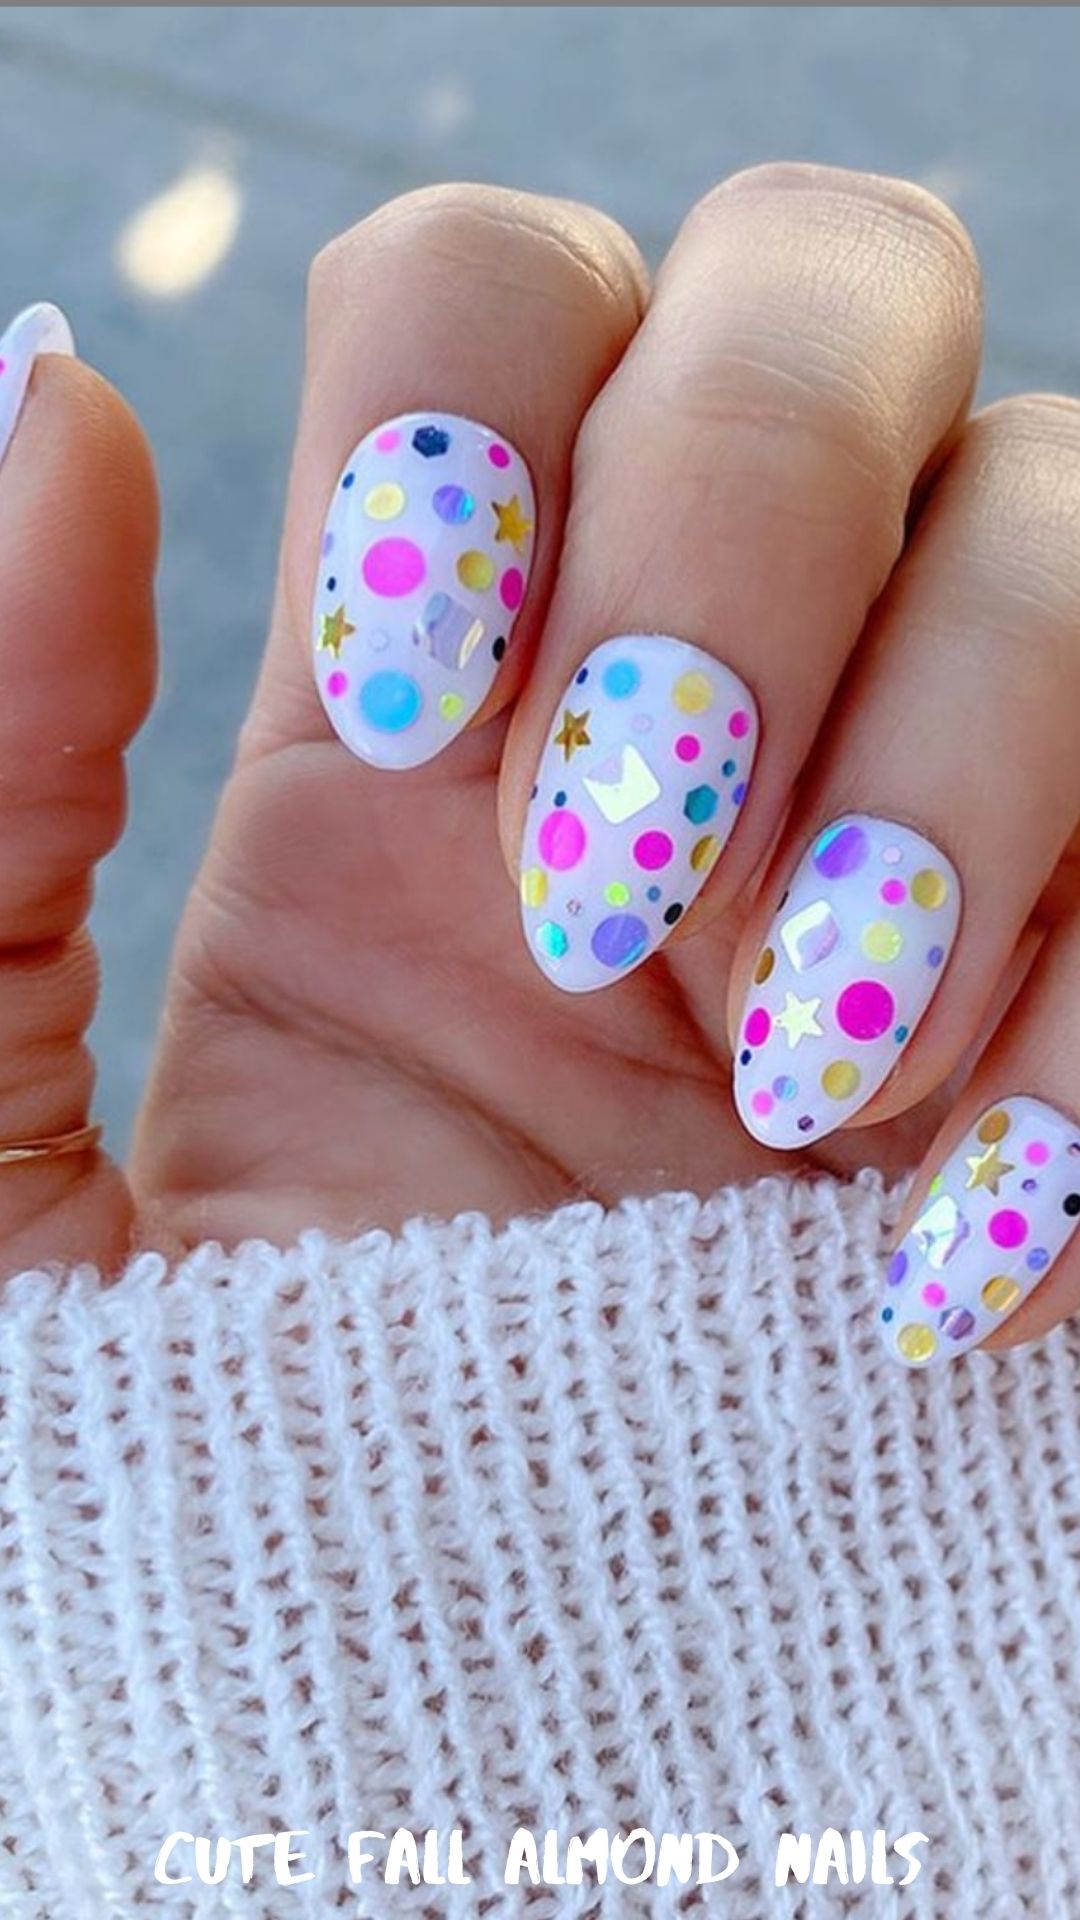  Best Short almond nails designs and Fall nail colors 2021 to try!